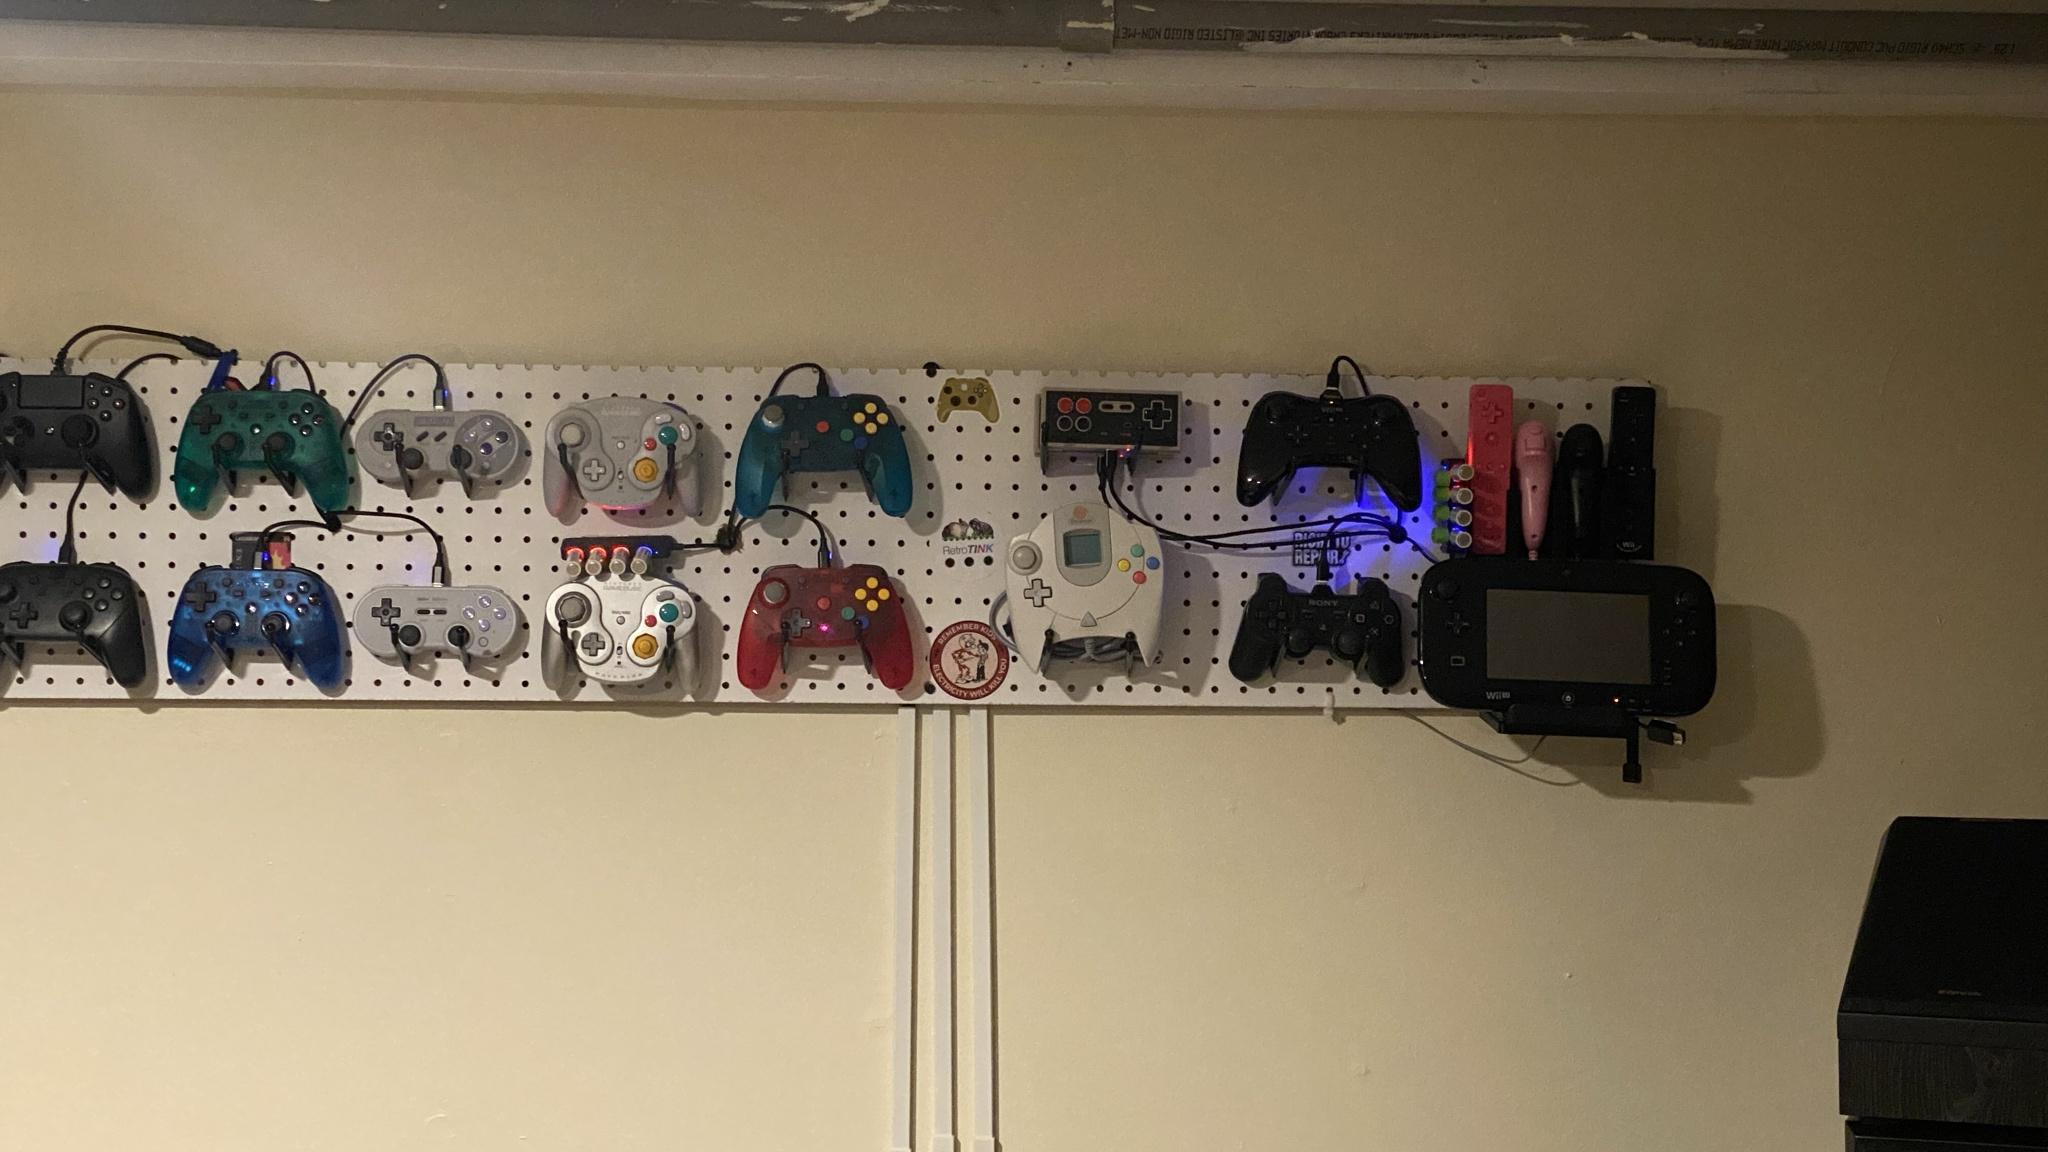 Made a thing for my controllers!